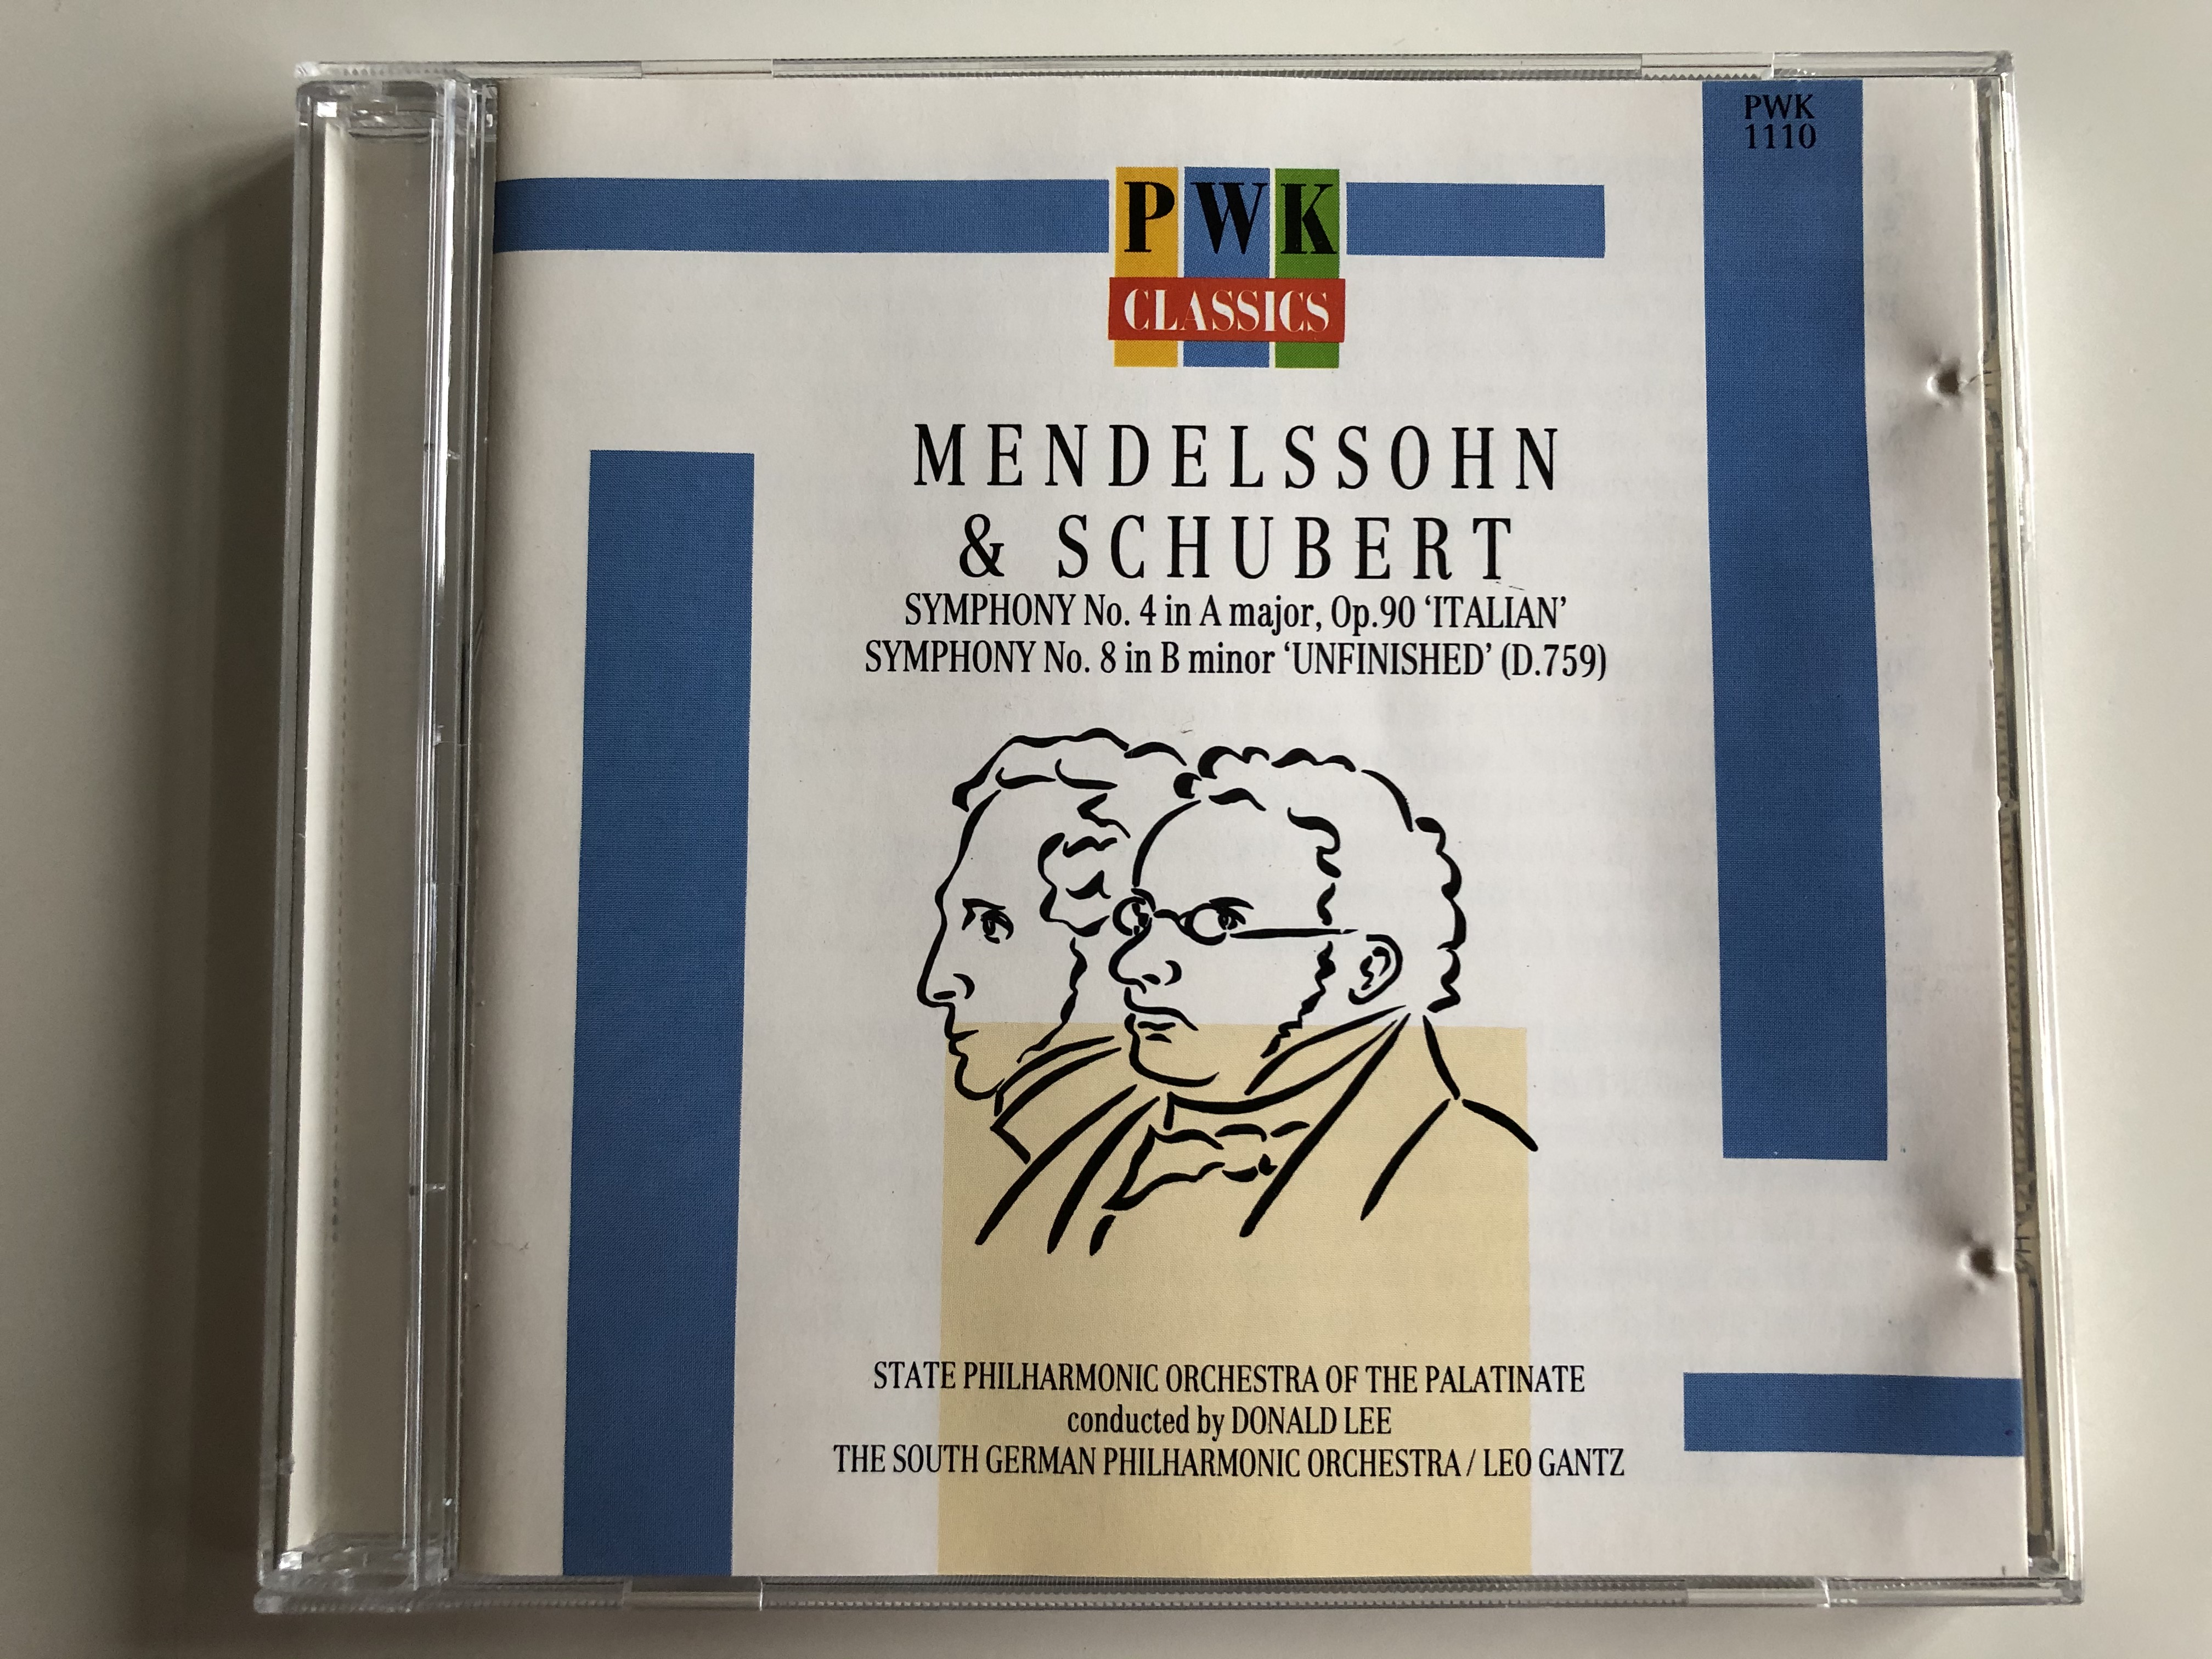 mendelssohn-schubert-symphony-no.4-in-a-major-op.90-italian-symphony-no.8-in-b-minor-unfinished-d.759-state-philharmonic-orchestra-of-the-palatinate-donald-lee-the-south-german-ph-1-.jpg